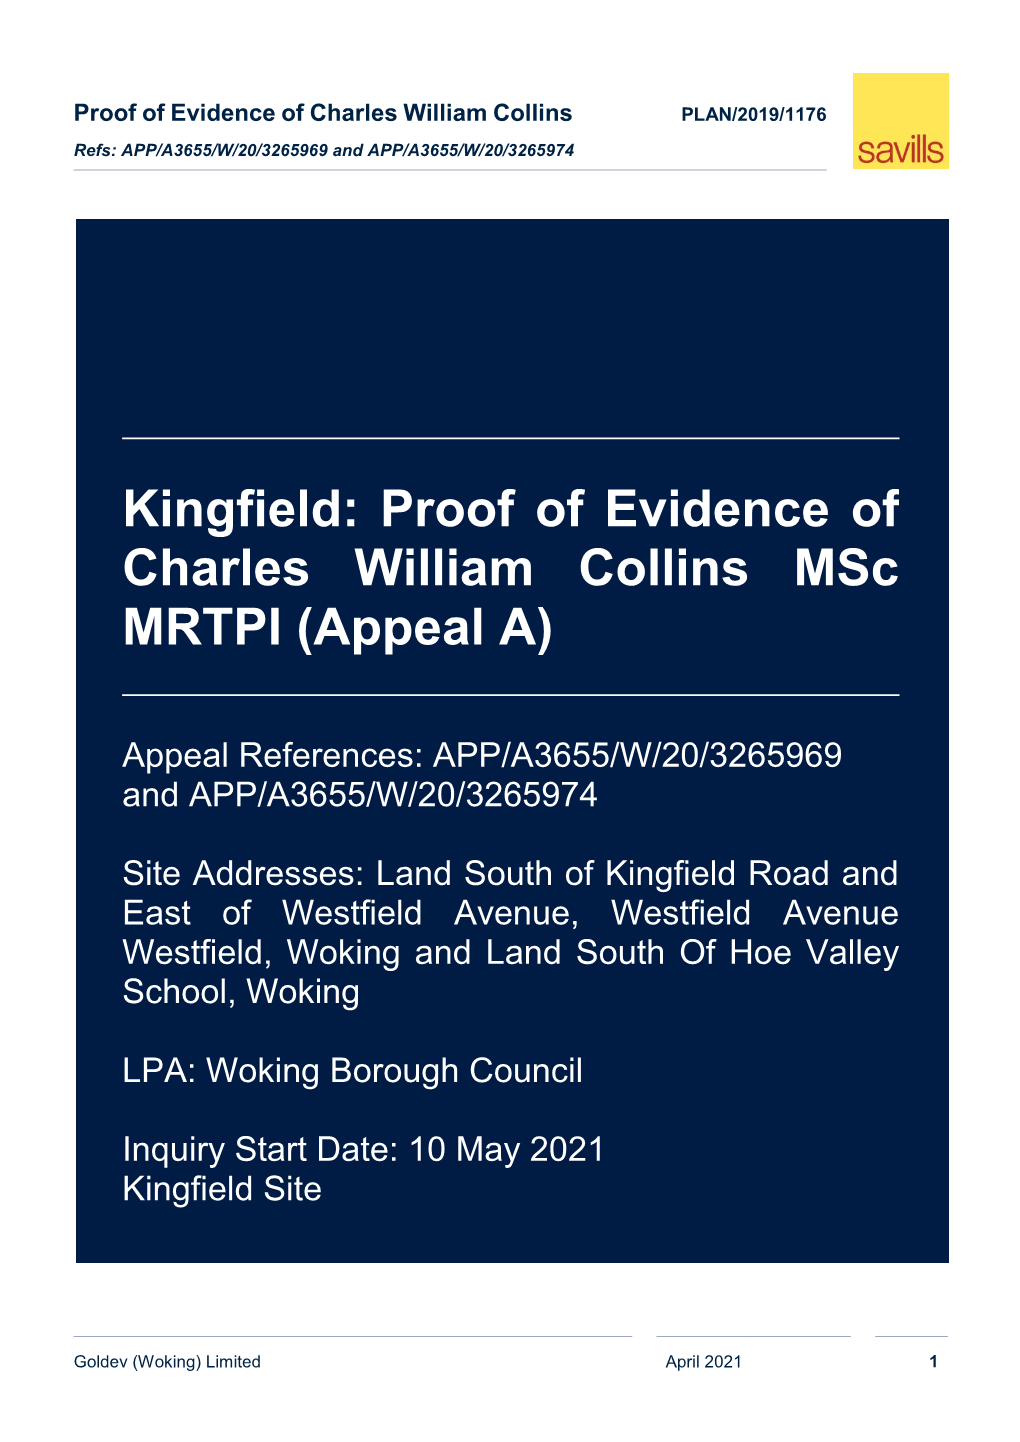 Kingfield: Proof of Evidence of Charles William Collins Msc MRTPI (Appeal A)